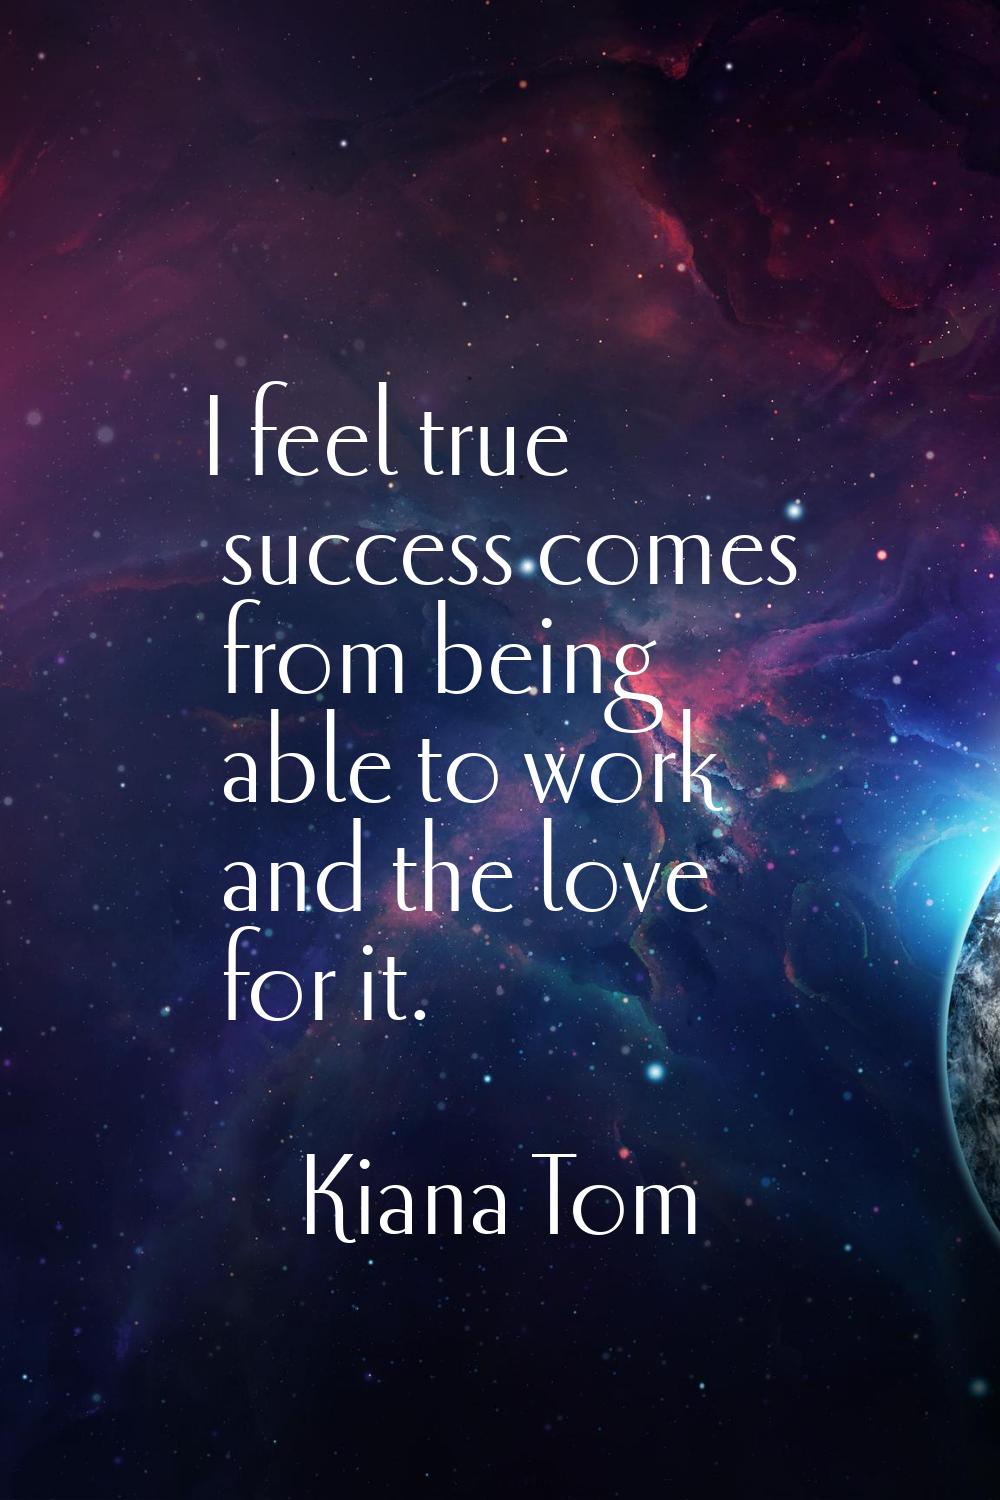 I feel true success comes from being able to work and the love for it.